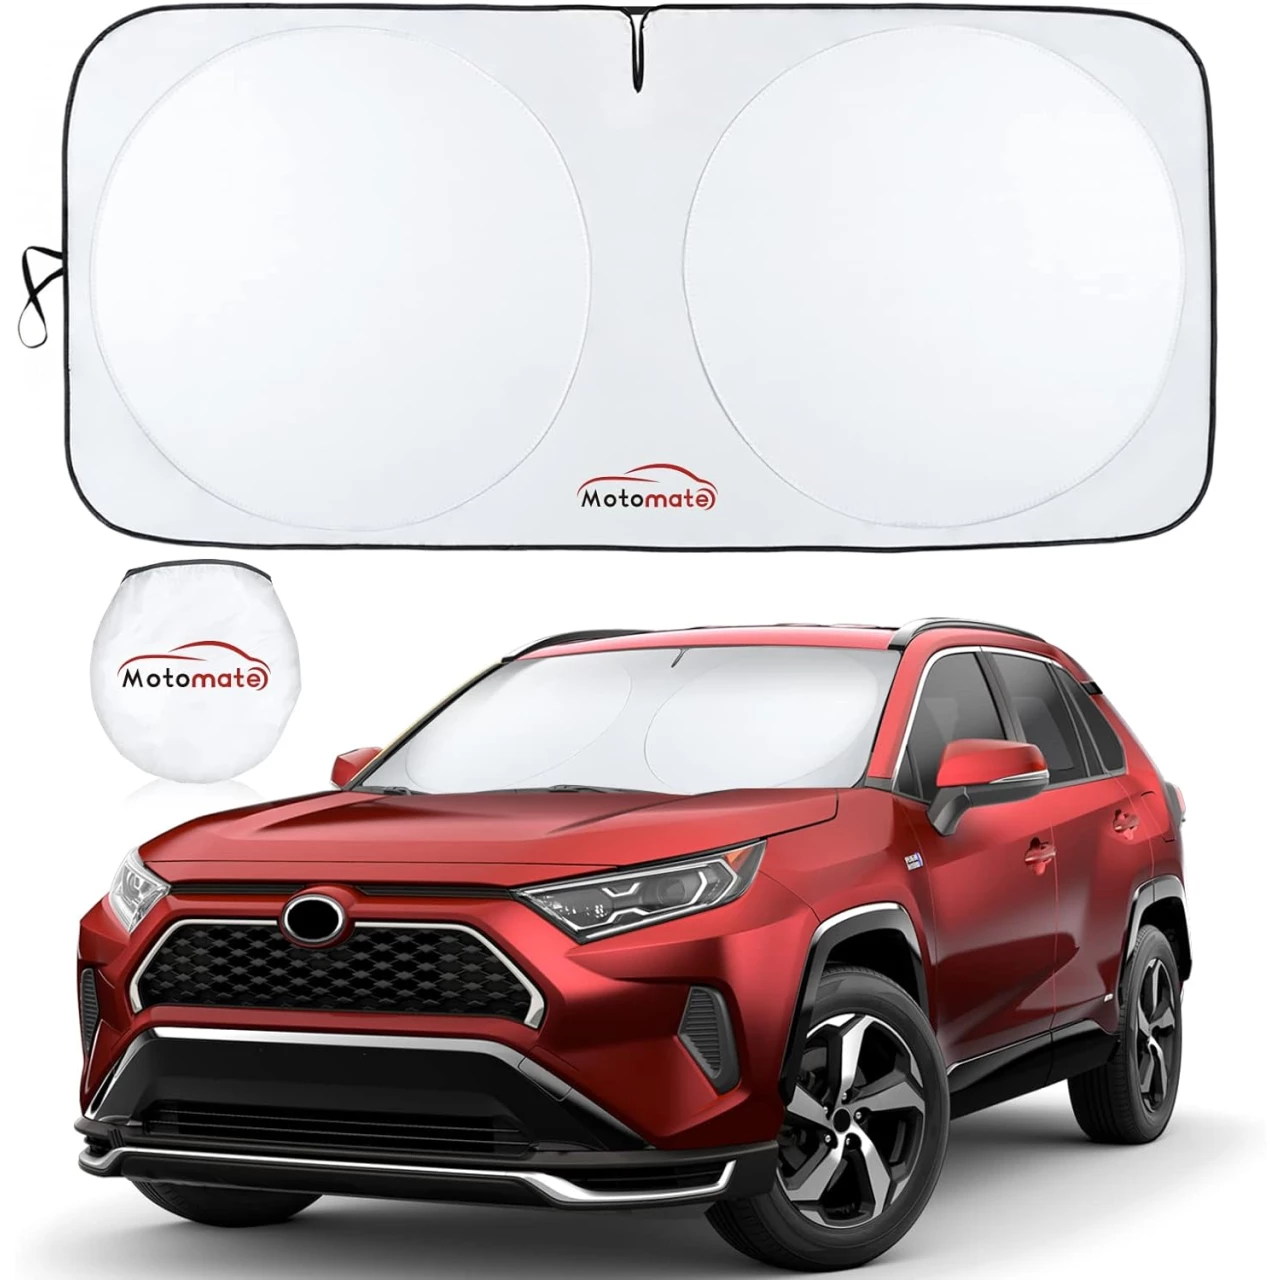 Windshield Sun Shade- 240T Motomate Durable Reflective Material, Block Heat and Sun, Foldable Sun Shade, Car Interior Accessories Summer, with a Pouch